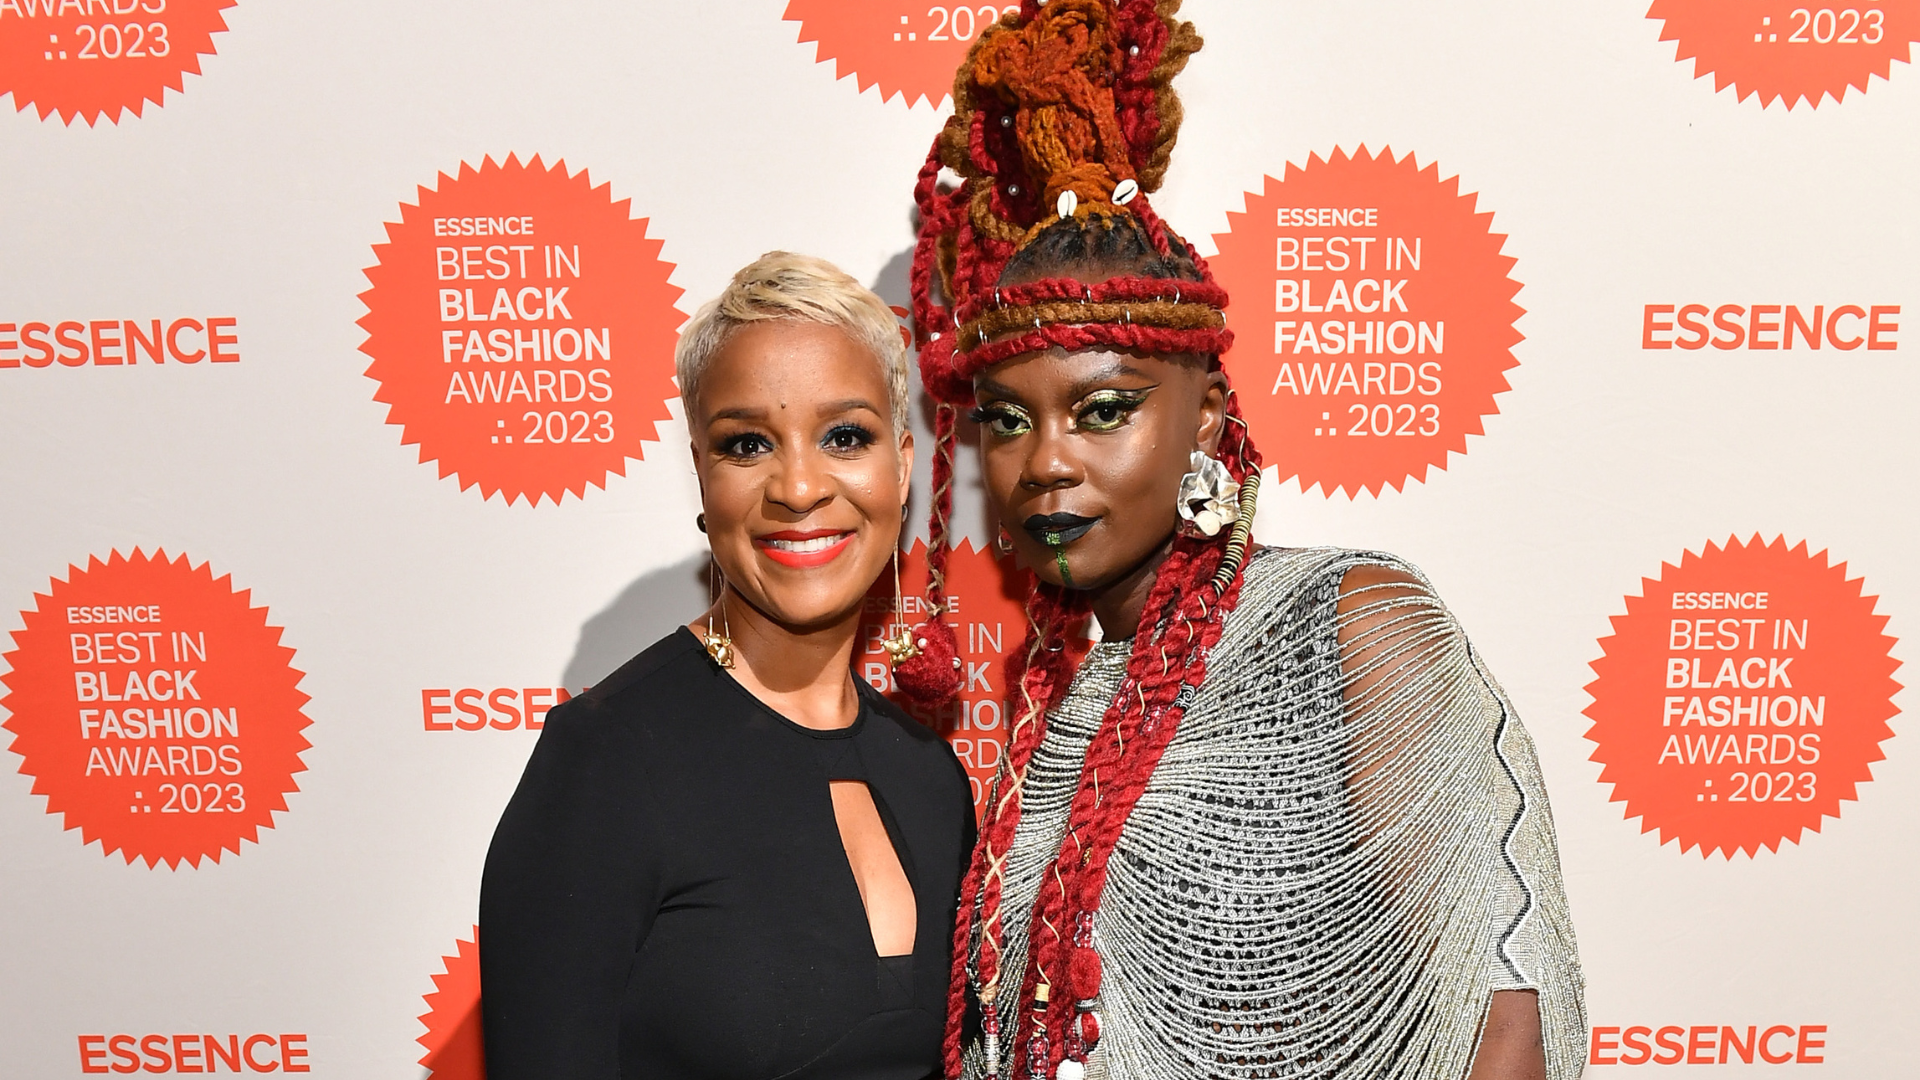  Brandice Daniel Wins Impact Award Of The Year At ESSENCE’s Best In Black Fashion Awards